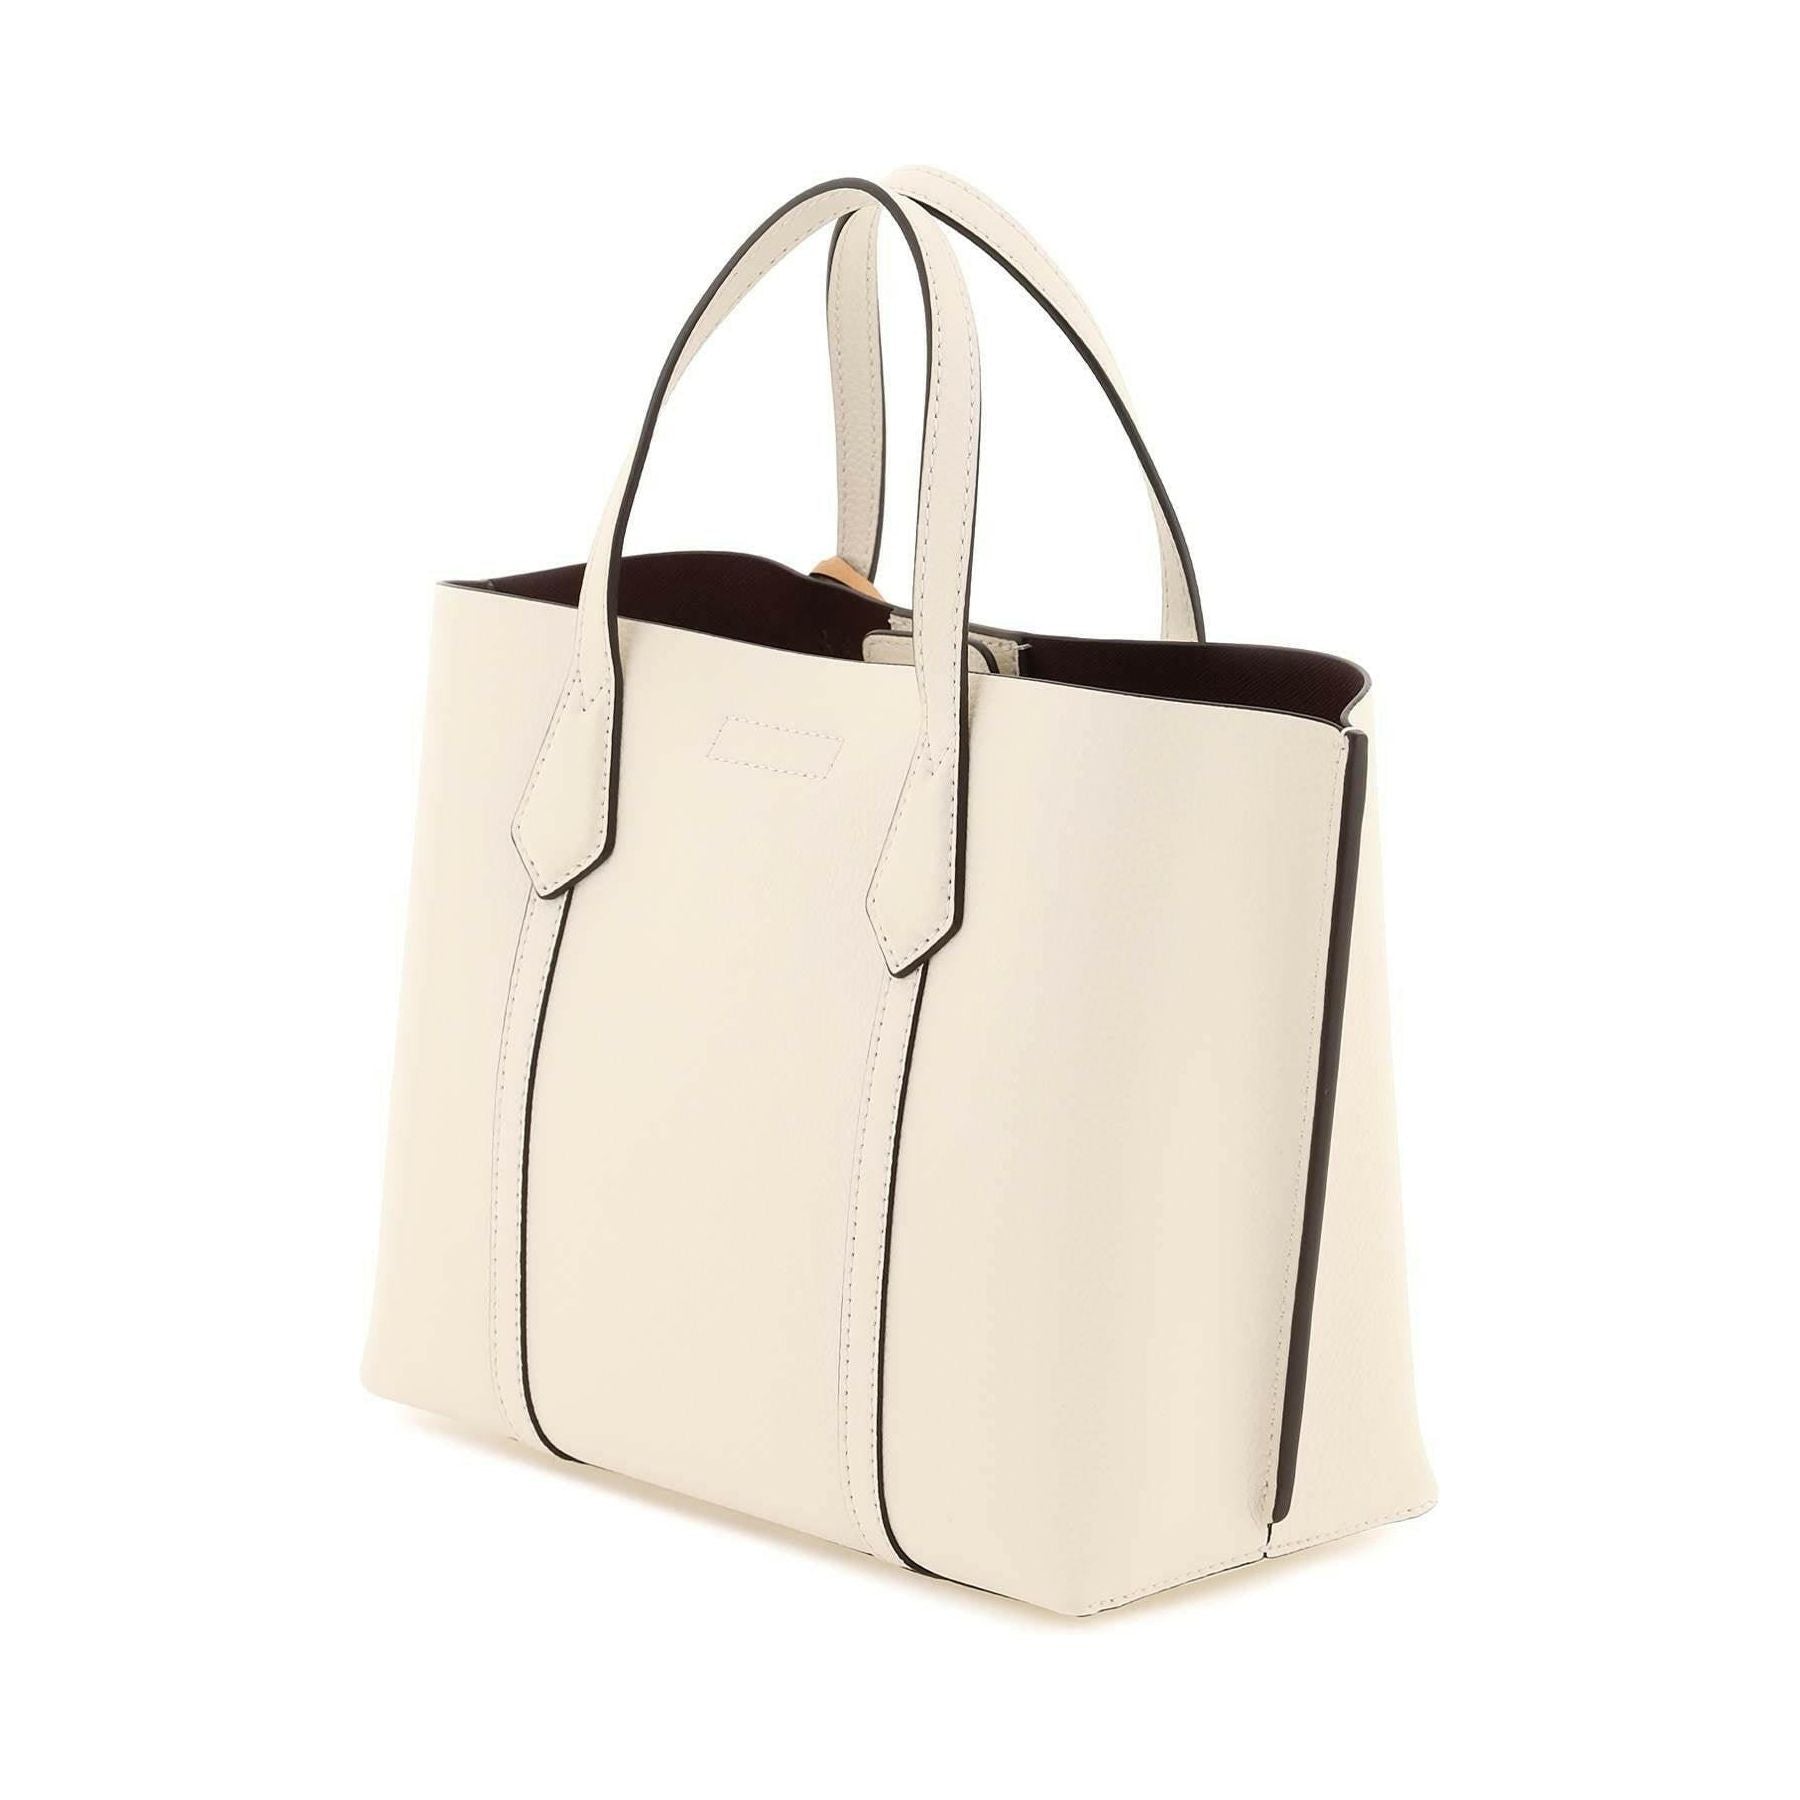 New Ivory Small Perry Leather Shopping Bag TORY BURCH JOHN JULIA.